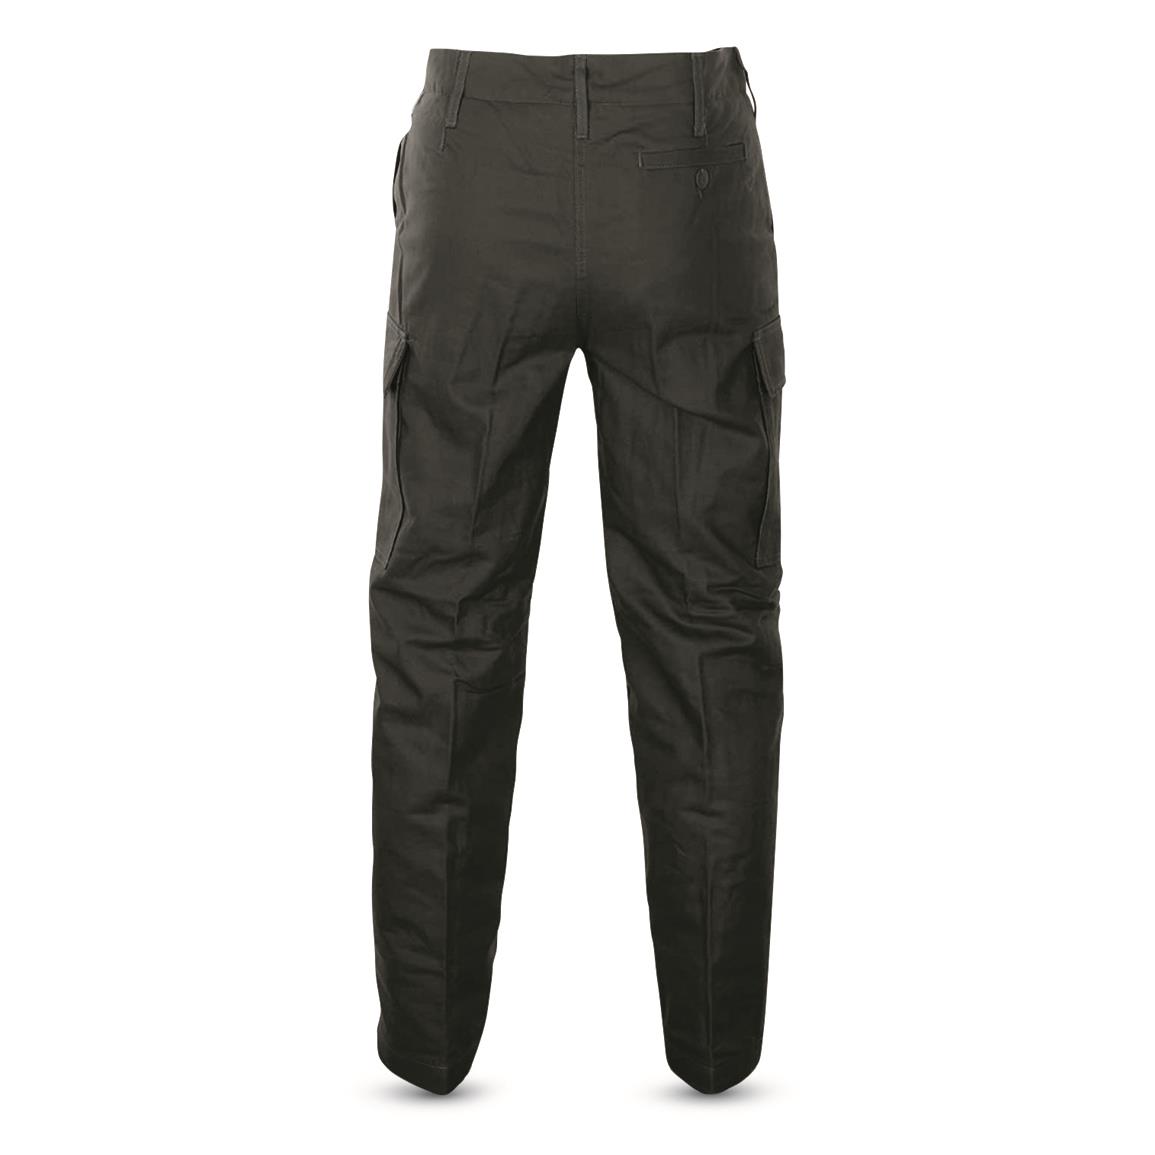 HQ ISSUE U.S. Military Style Ripstop BDU Pants, Black - 727502 ...